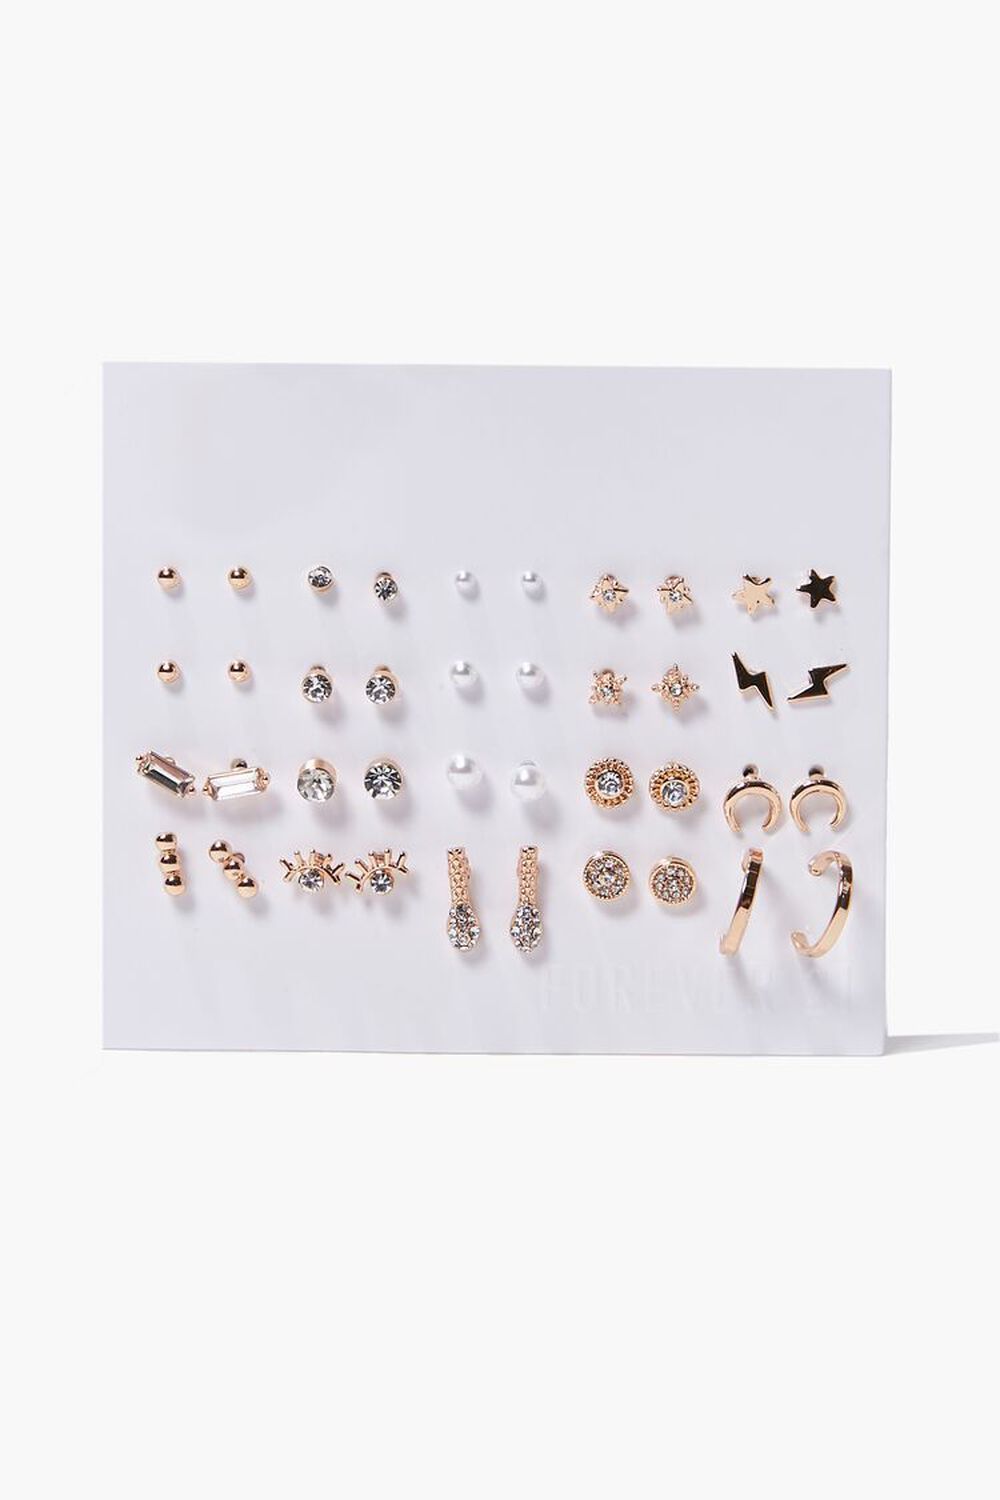 GOLD/WHITE Variety Faux Pearl Stud Earring Set, image 1